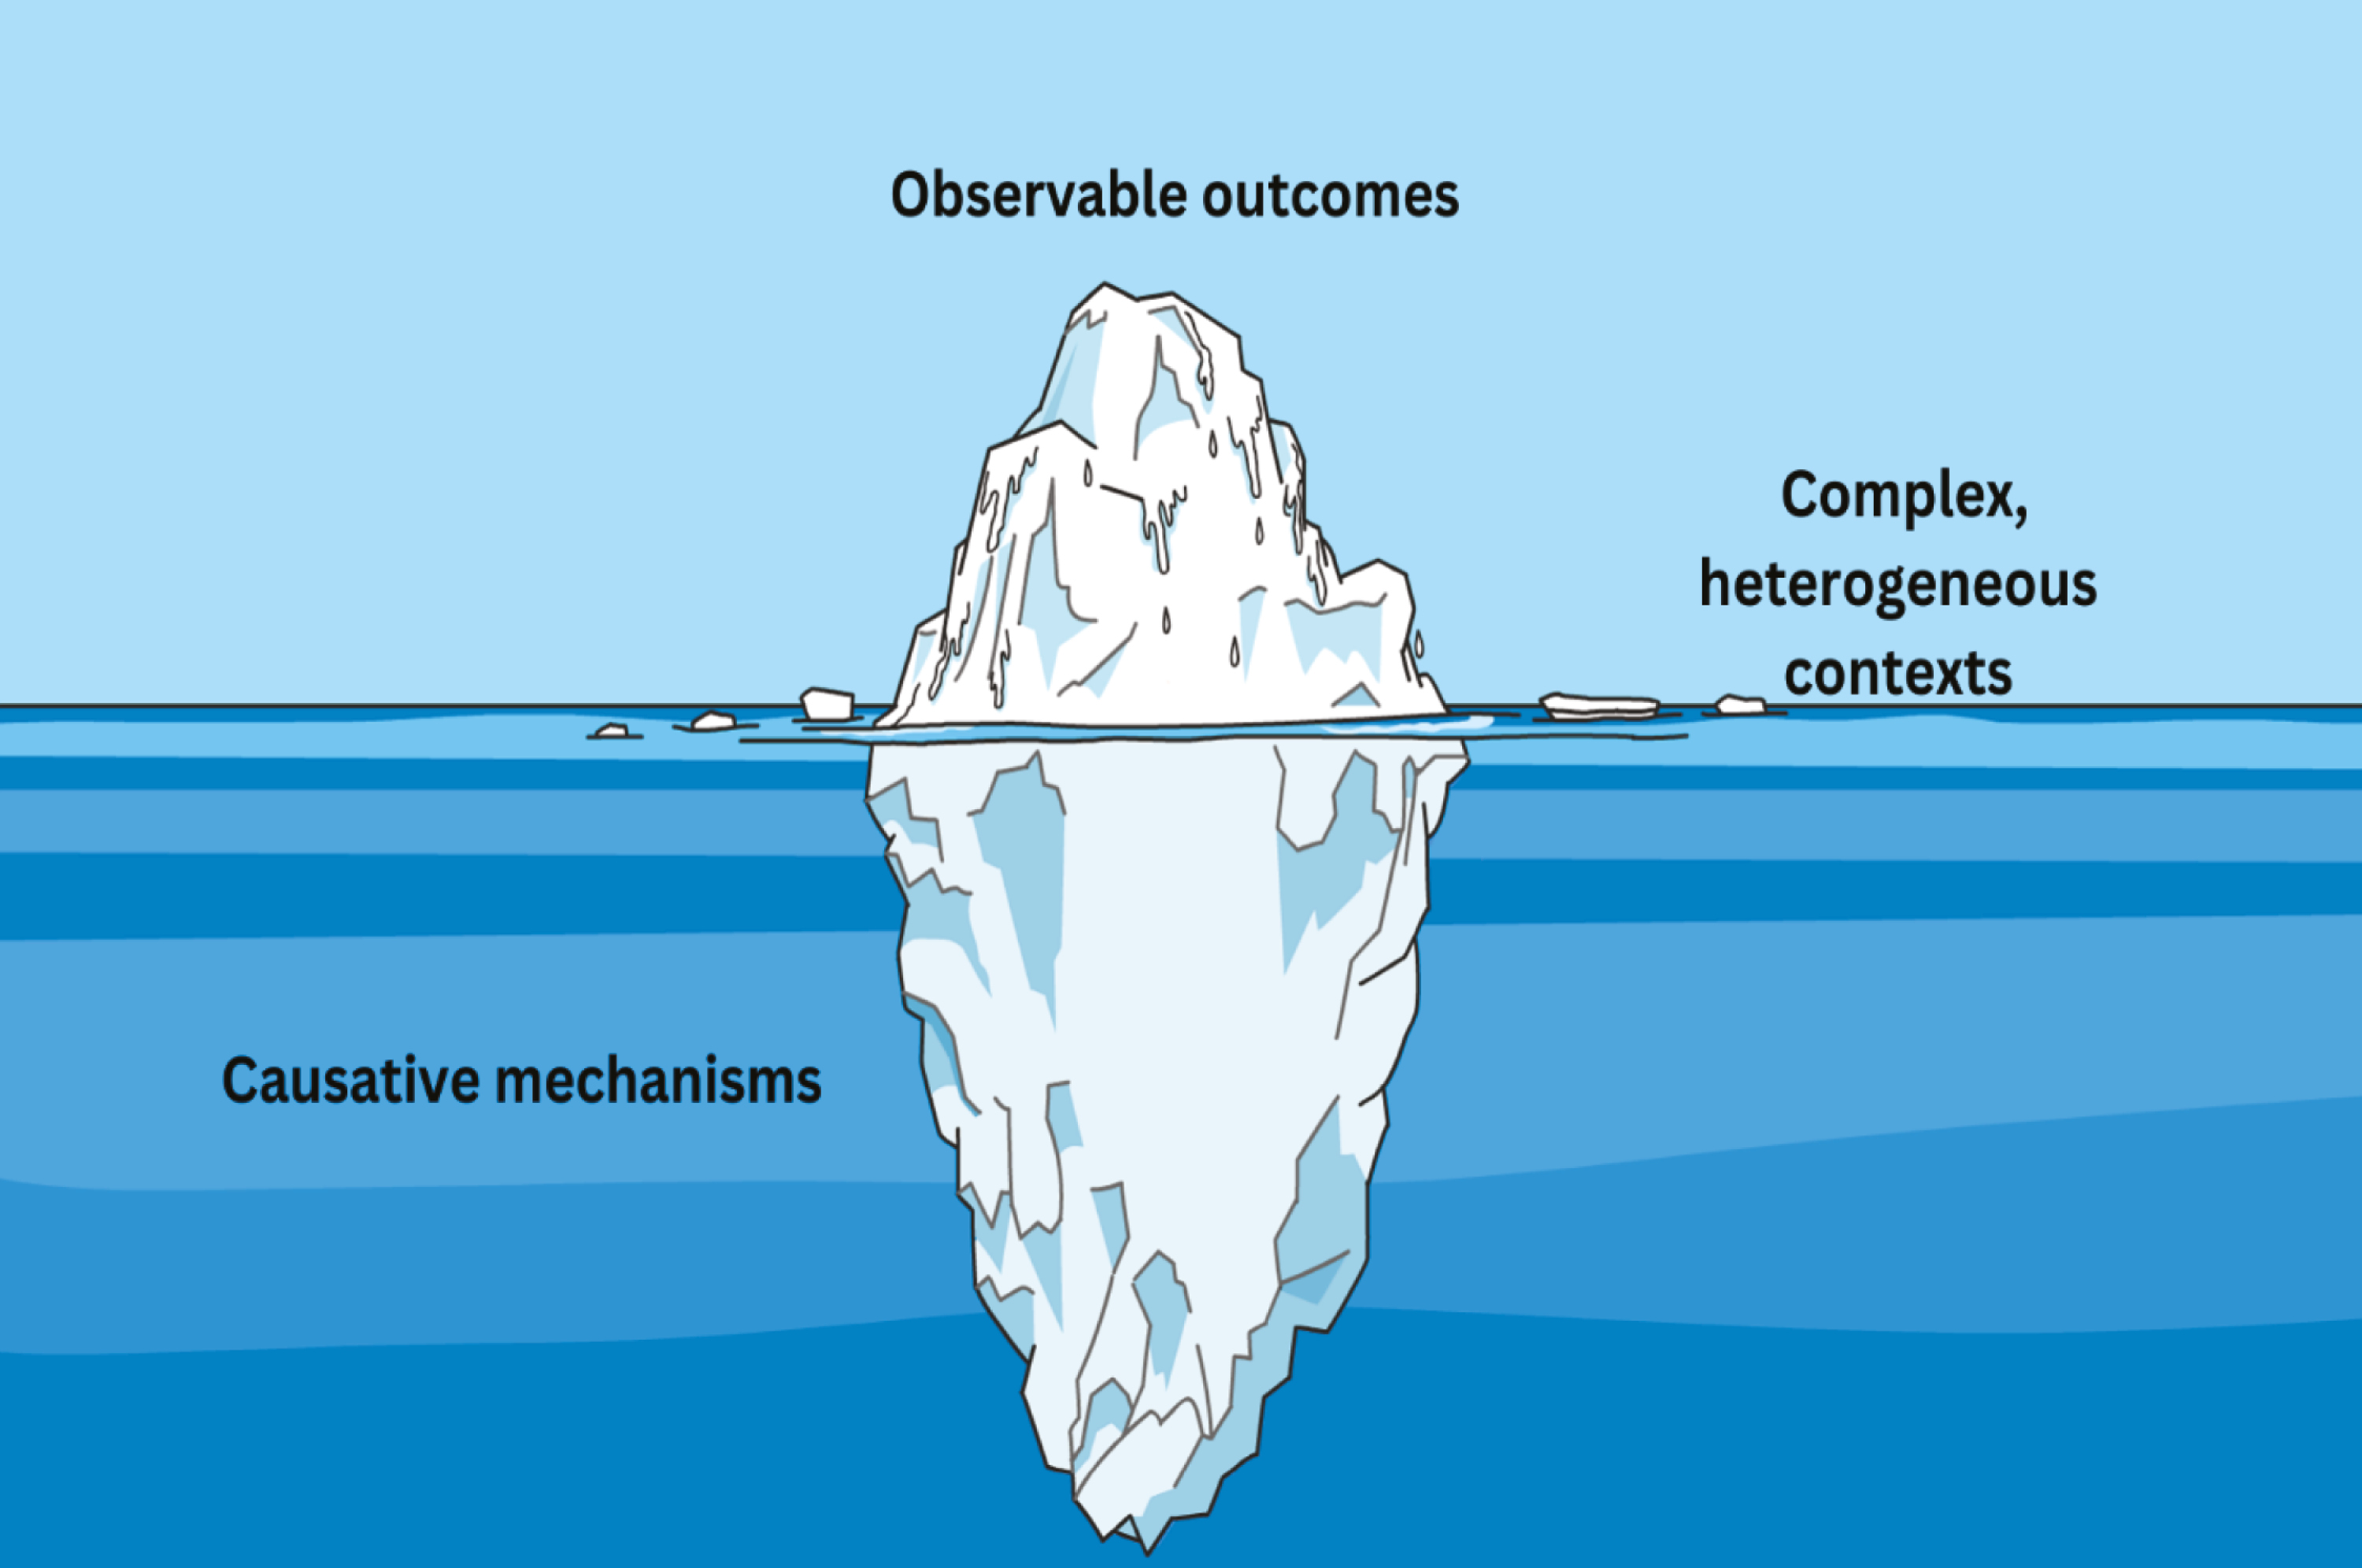 A realist iceberg analogy (edited in https://www.canva.com/)